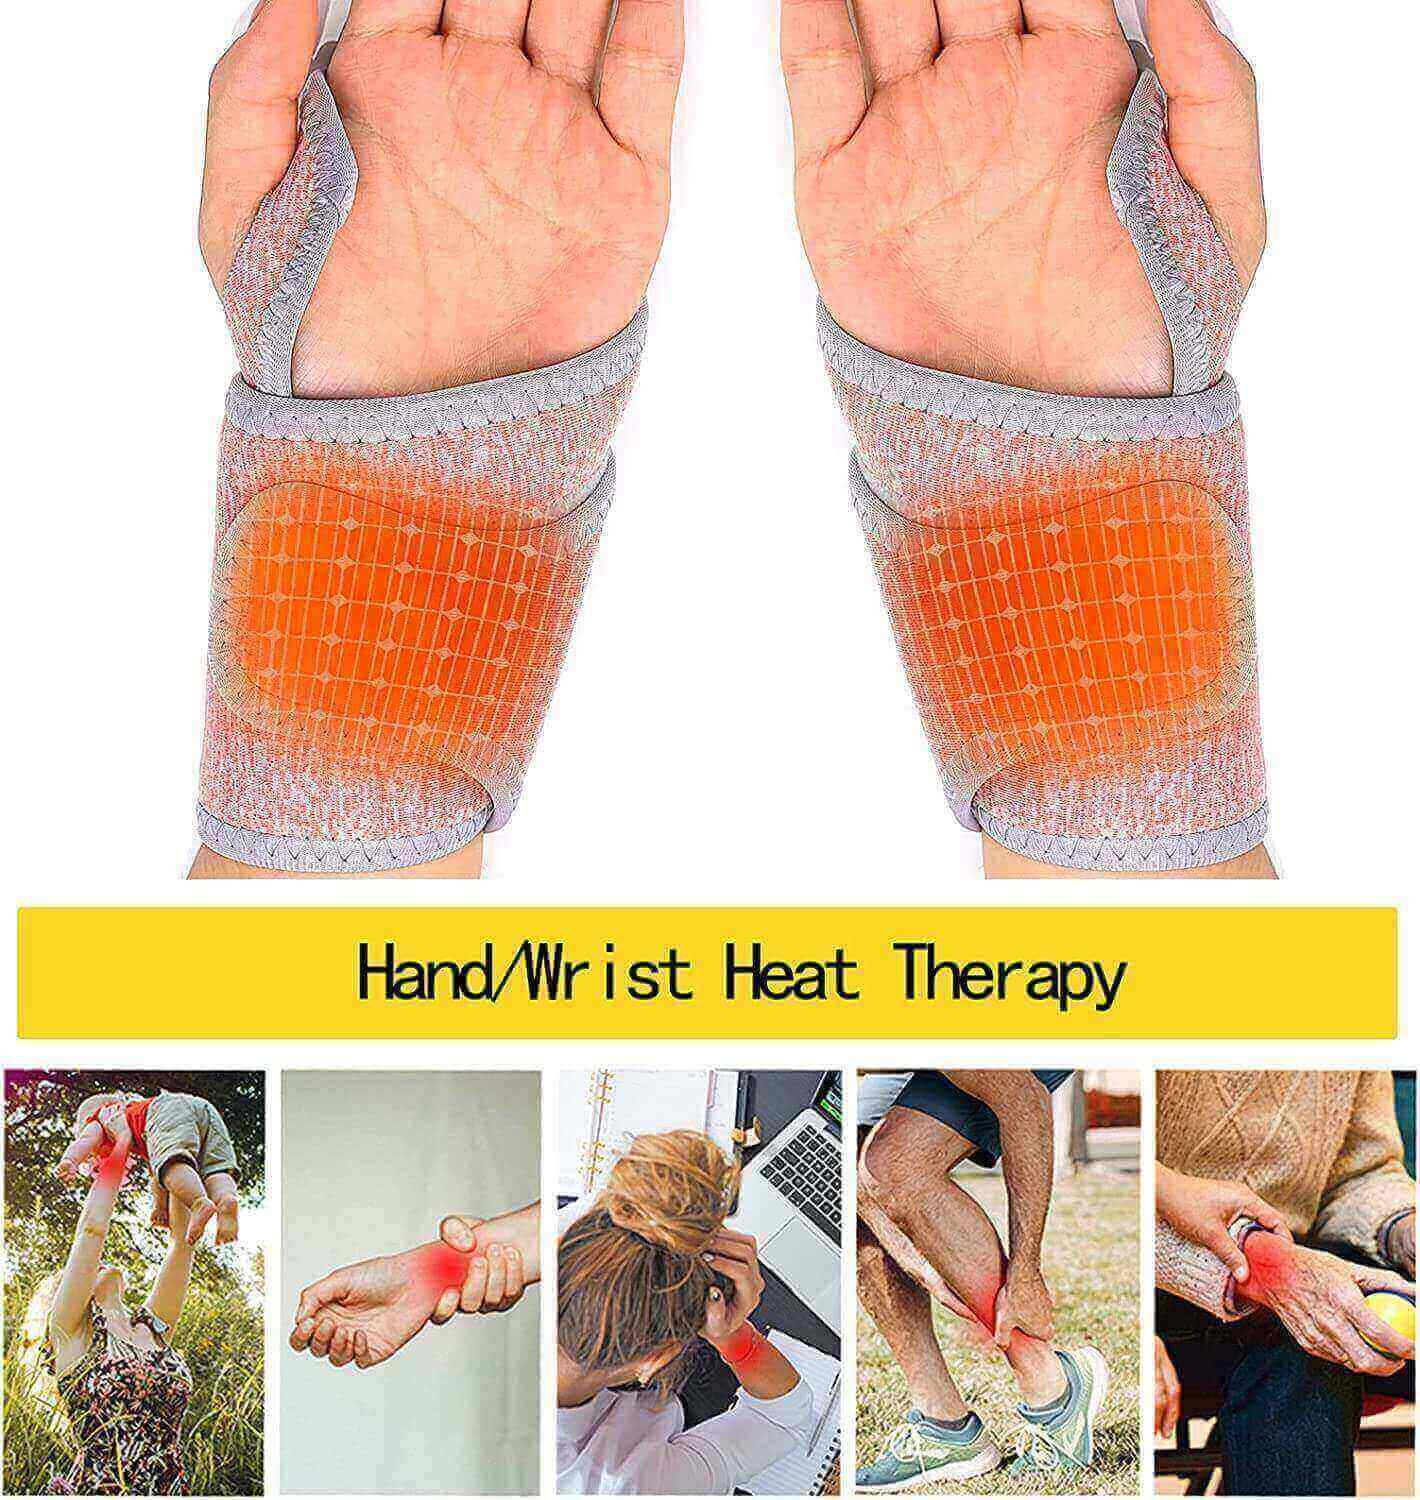 Fanwer Electric Heating Pad for Wrist & Hand, heat therapy for wrist and hand